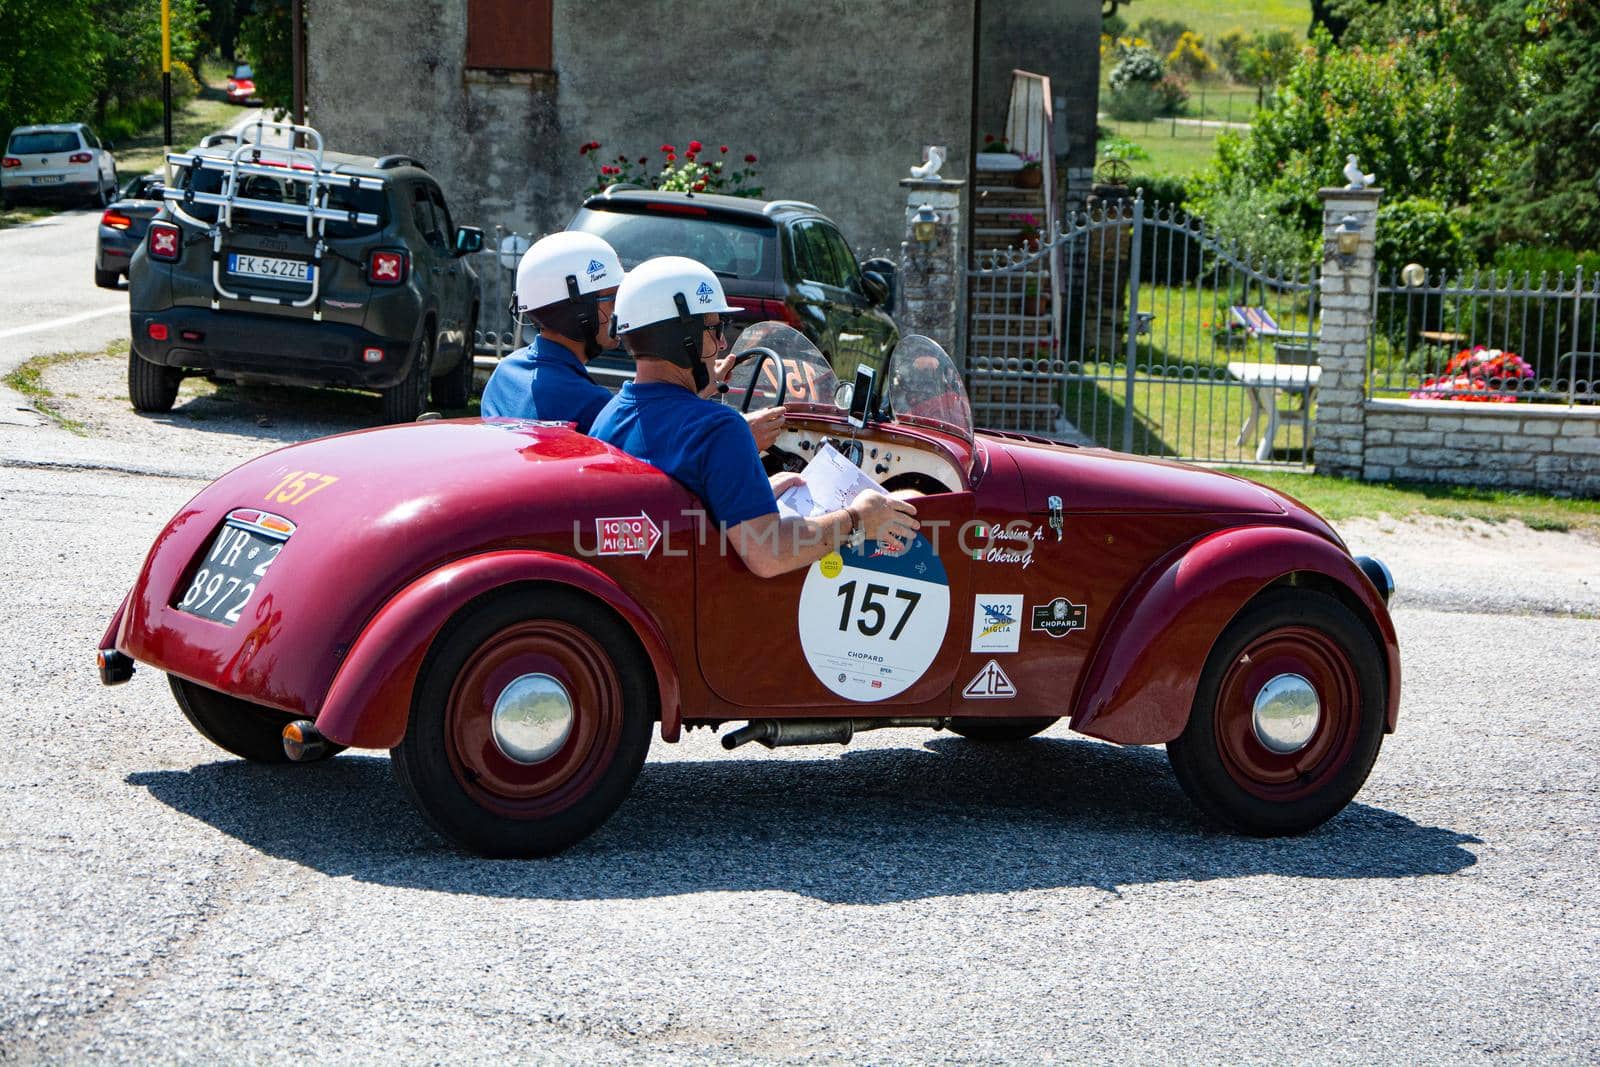 FIAT 500 SPORT 1949 on an old racing car in rally Mille Miglia 2022 the famous italian historical race (1927-1957 by massimocampanari